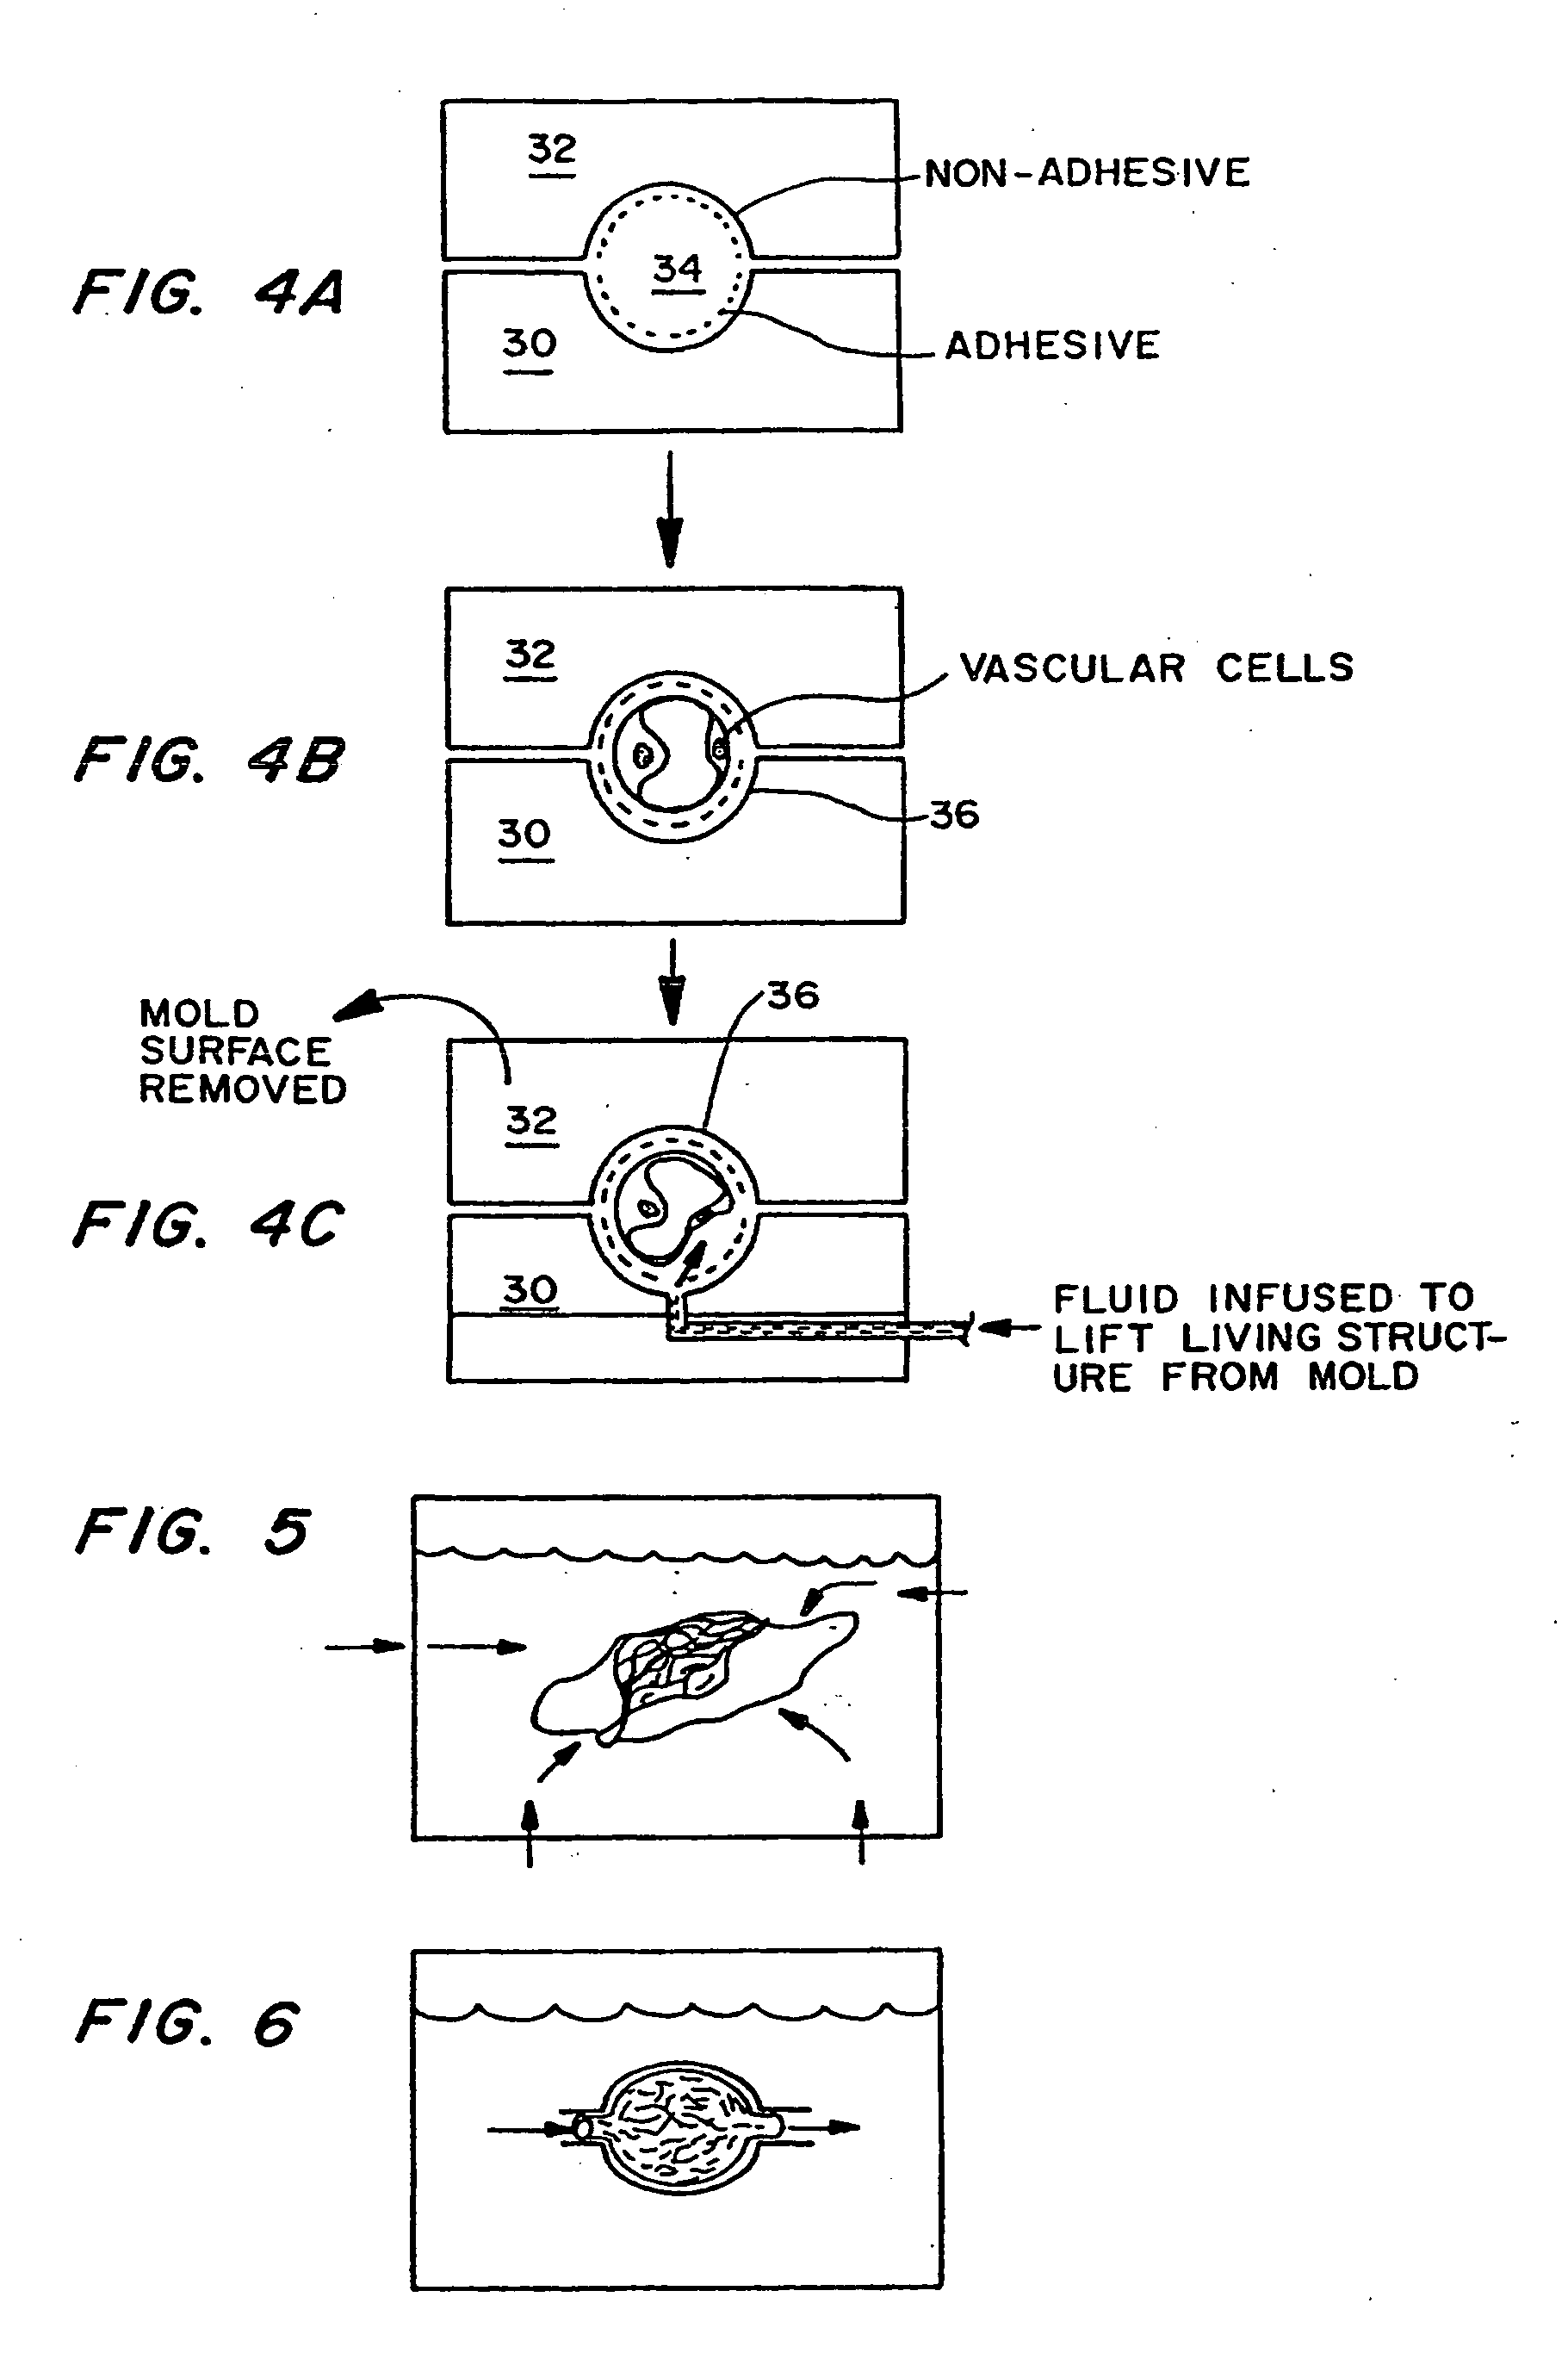 Fabrication of vascularized tissue using microfabricated two-dimensional molds